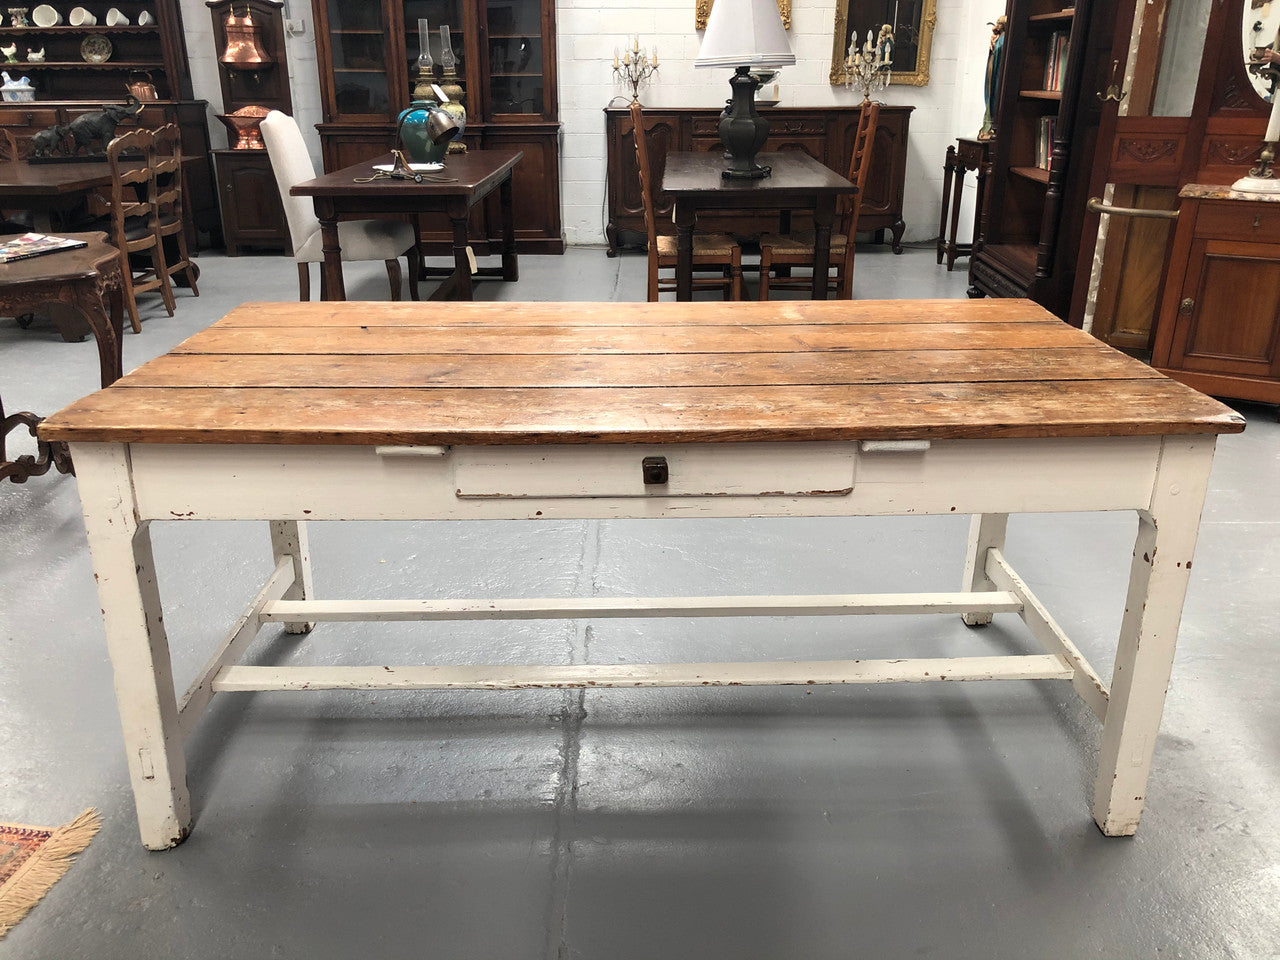 Early Victorian Pine table/desk with drawer on one side and white painted base. This would make an ideal desk for someone who needs plenty of space to work or an ideal dinning table for a small area. In good original detailed condition.